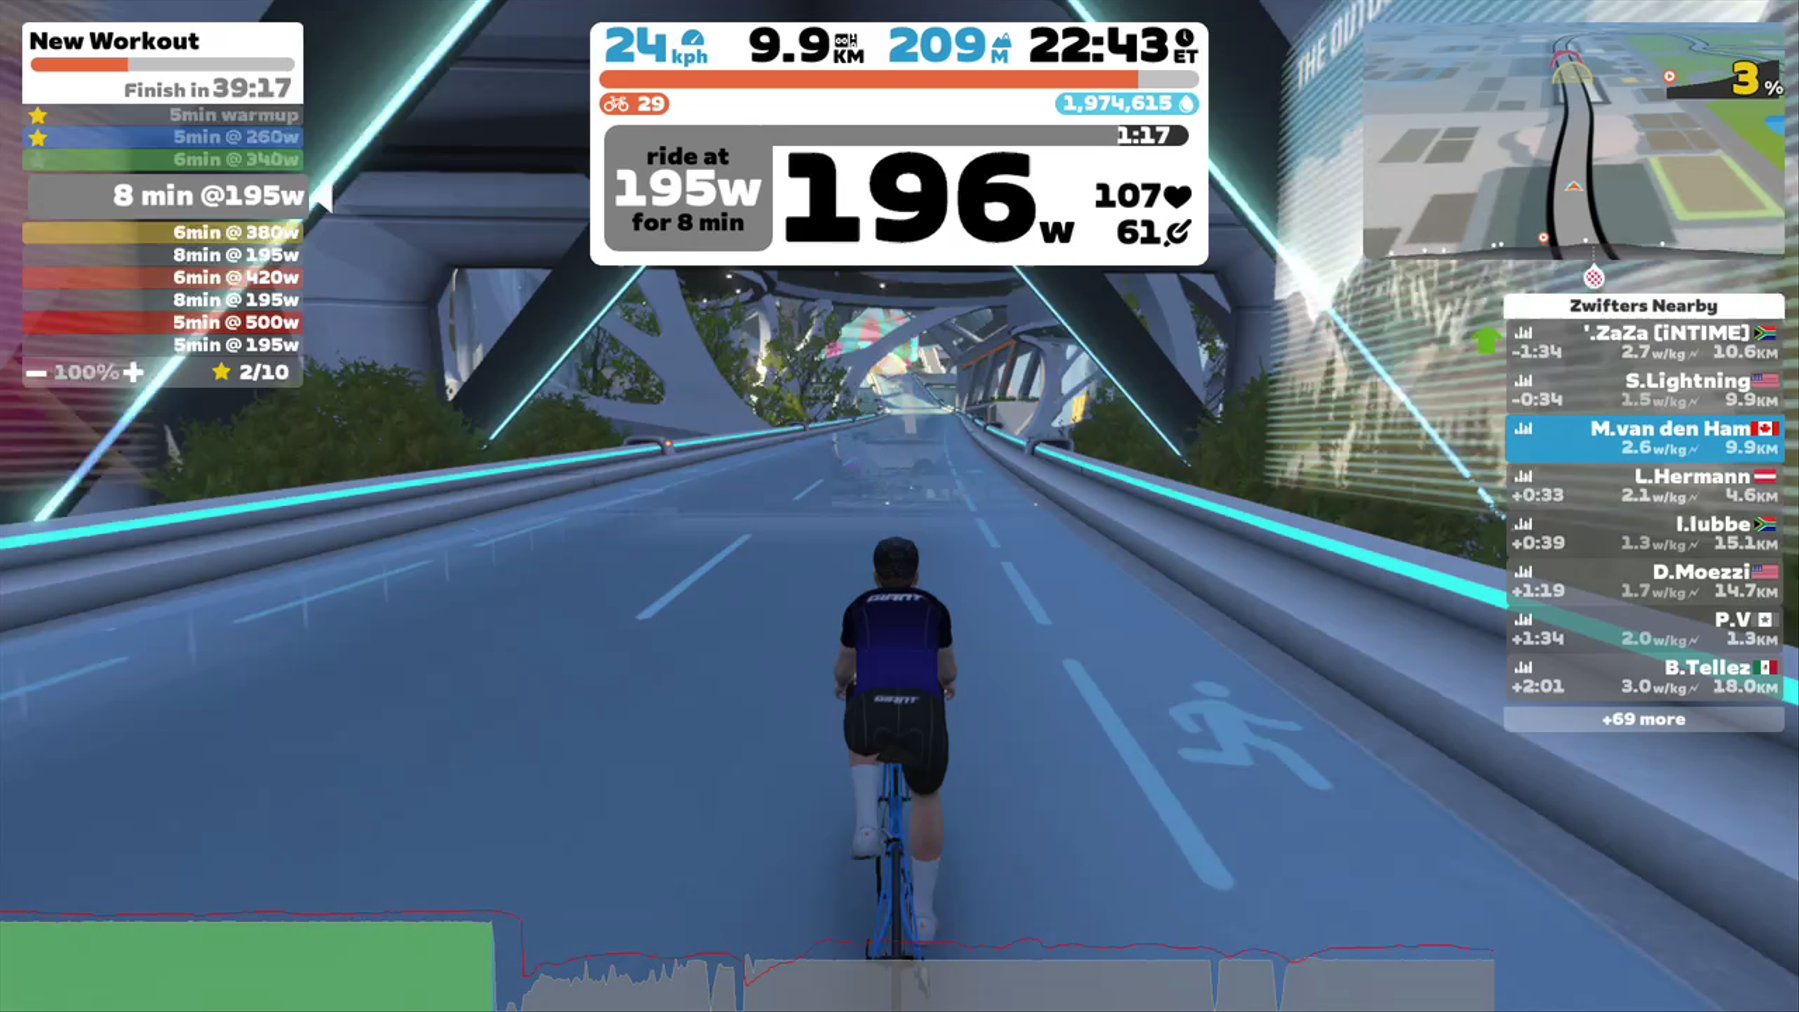 Zwift - New Workout in New York